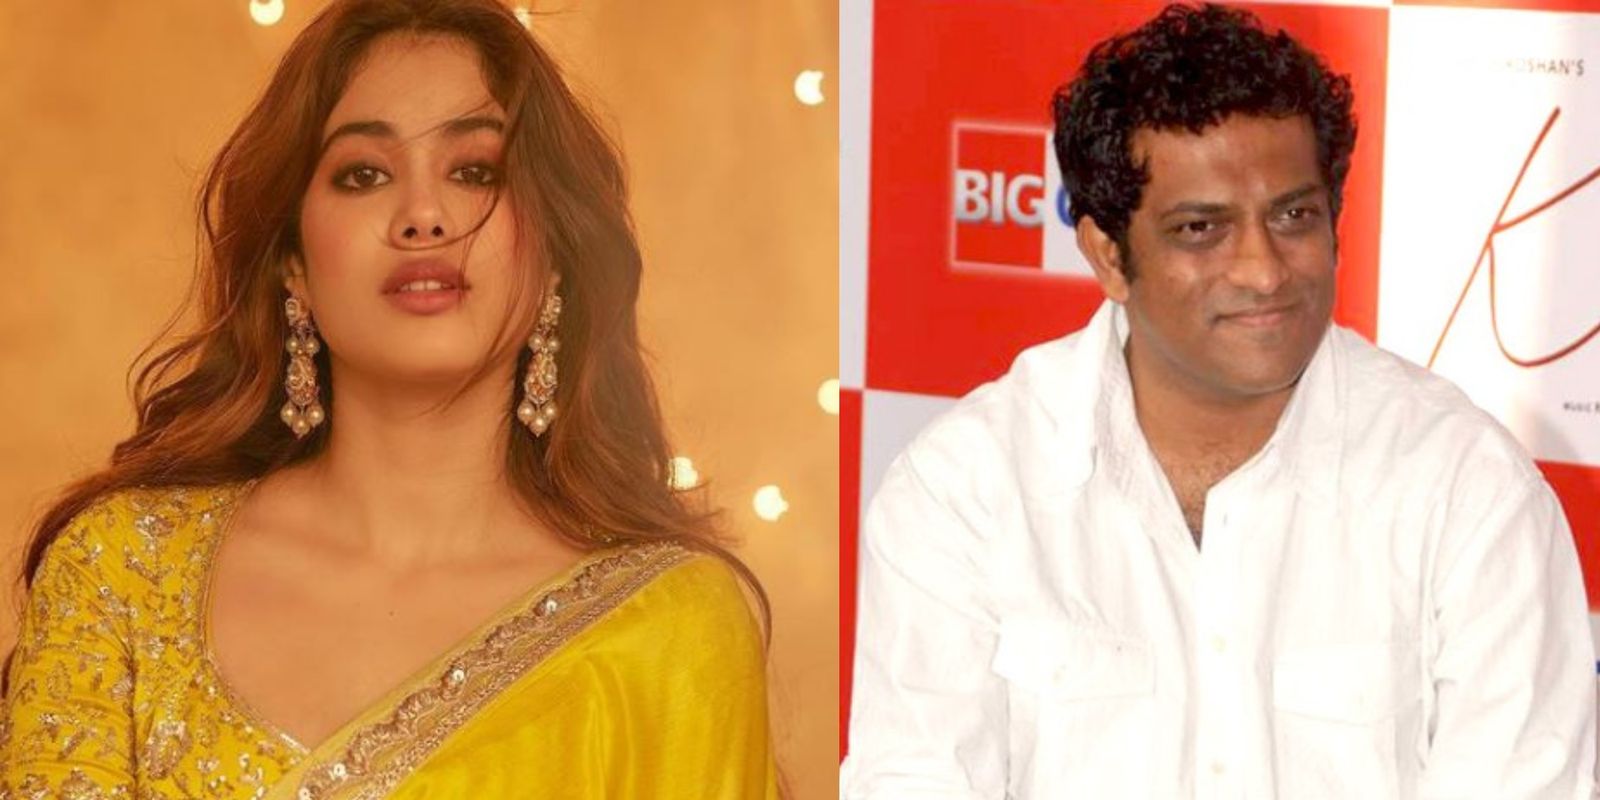 Janhvi Kapoor To Collaborate With Anurag Basu For A Film? Here's What We Know